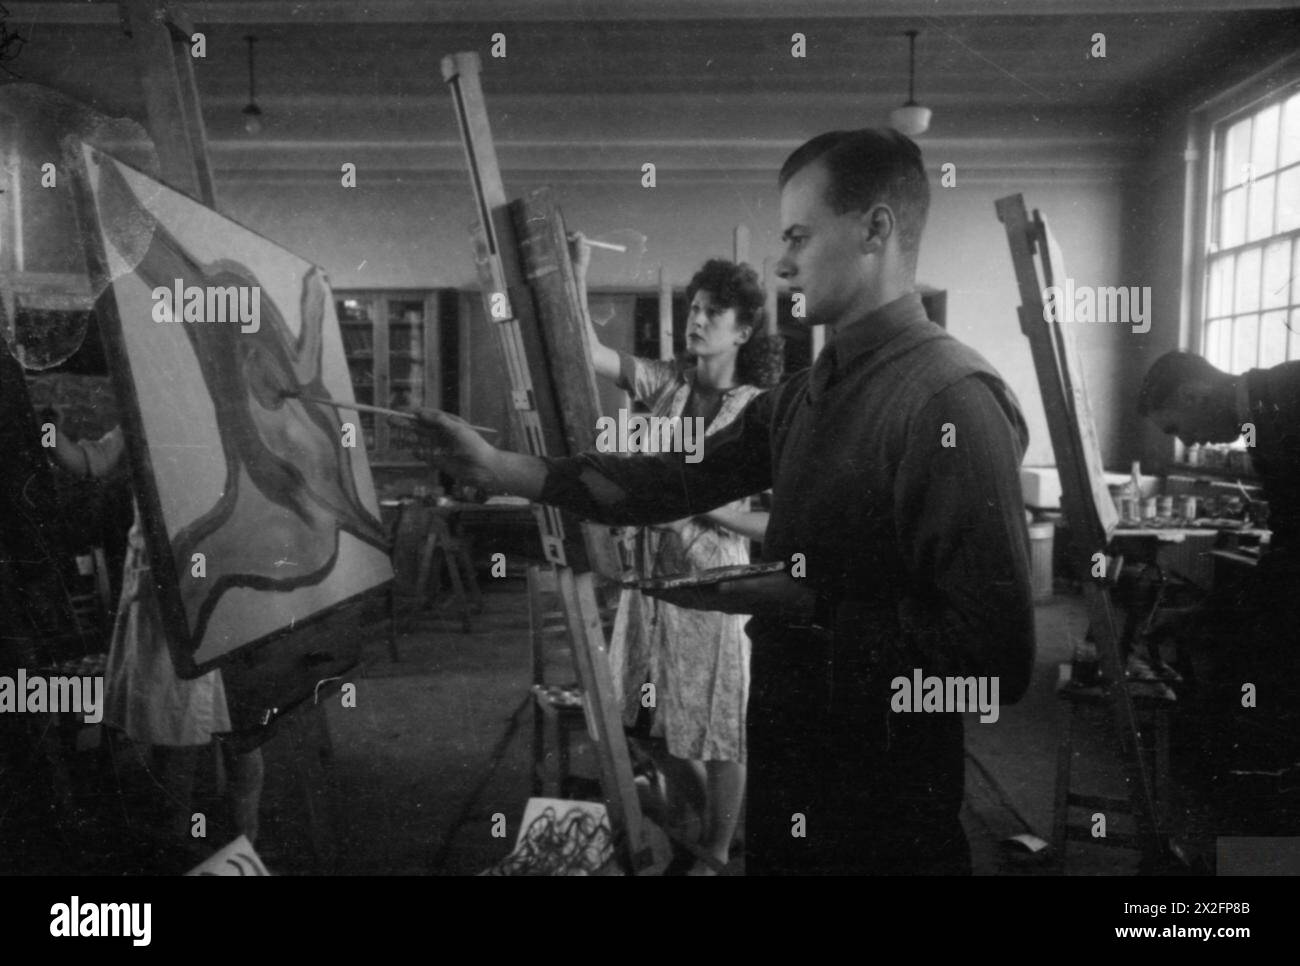 FROM THE SERVICES TO SCHOOLMASTERING: RE-TRAINING AT GOLDSMITH'S COLLEGE, LONDON UNIVERSITY, NOTTINGHAM, ENGLAND, 1944 - Two of the 28 ex-servicemen training to be teachers at Goldsmiths College (based at Nottingham University since the outbreak of war) are training to have art as their main subject. Here one of the men takes part in an art class at Nottingham University, which, according to the original caption, should give him some 'sense of design' Stock Photo